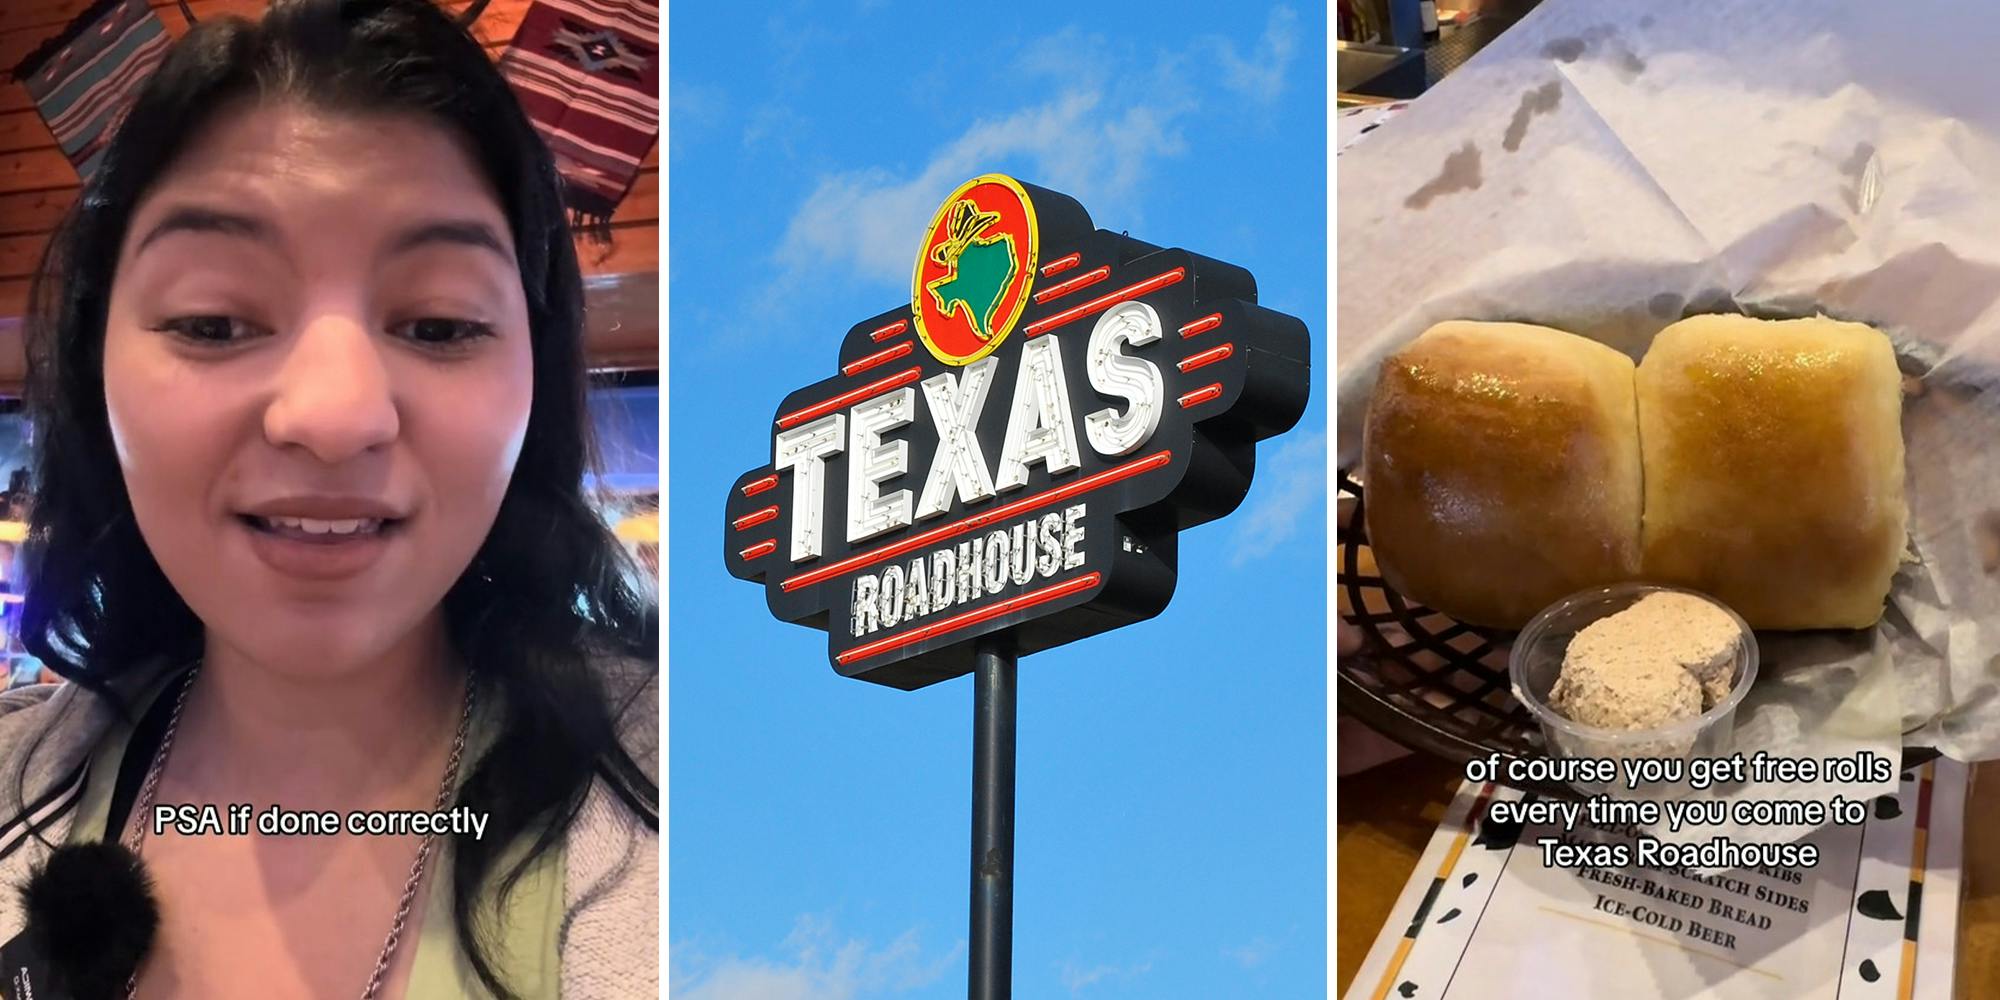 ‘It’s a total steal’: Customer declares Texas Roadhouse a ‘cheap eat’ after spending $12.99 for an entree with 2 sides